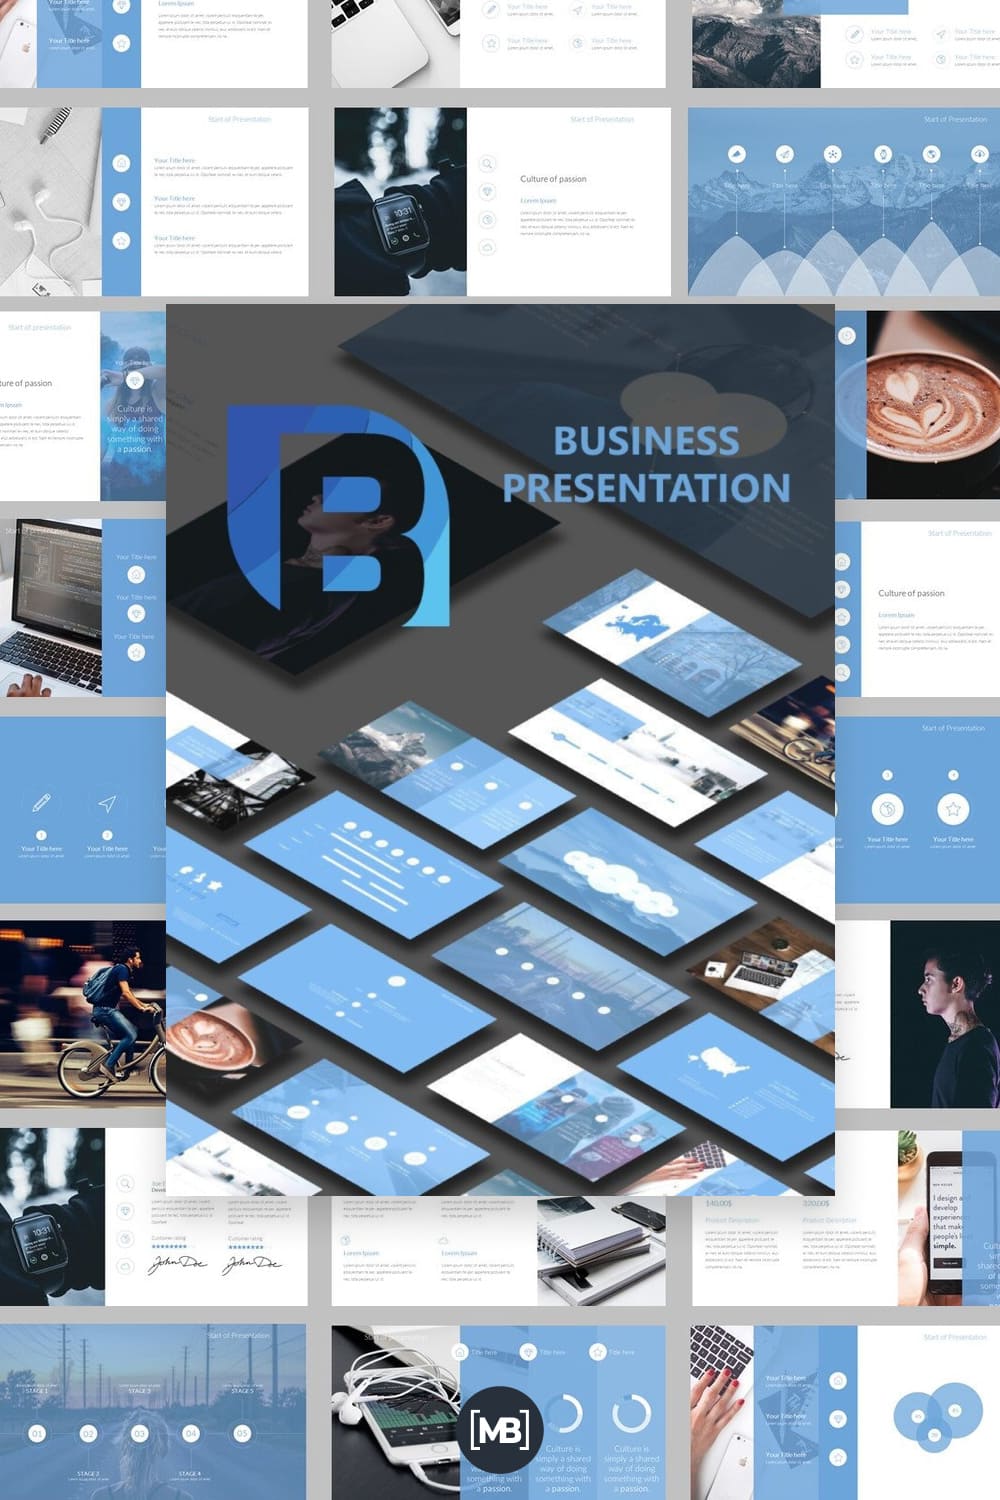 Animated business presentation powerpoint template.